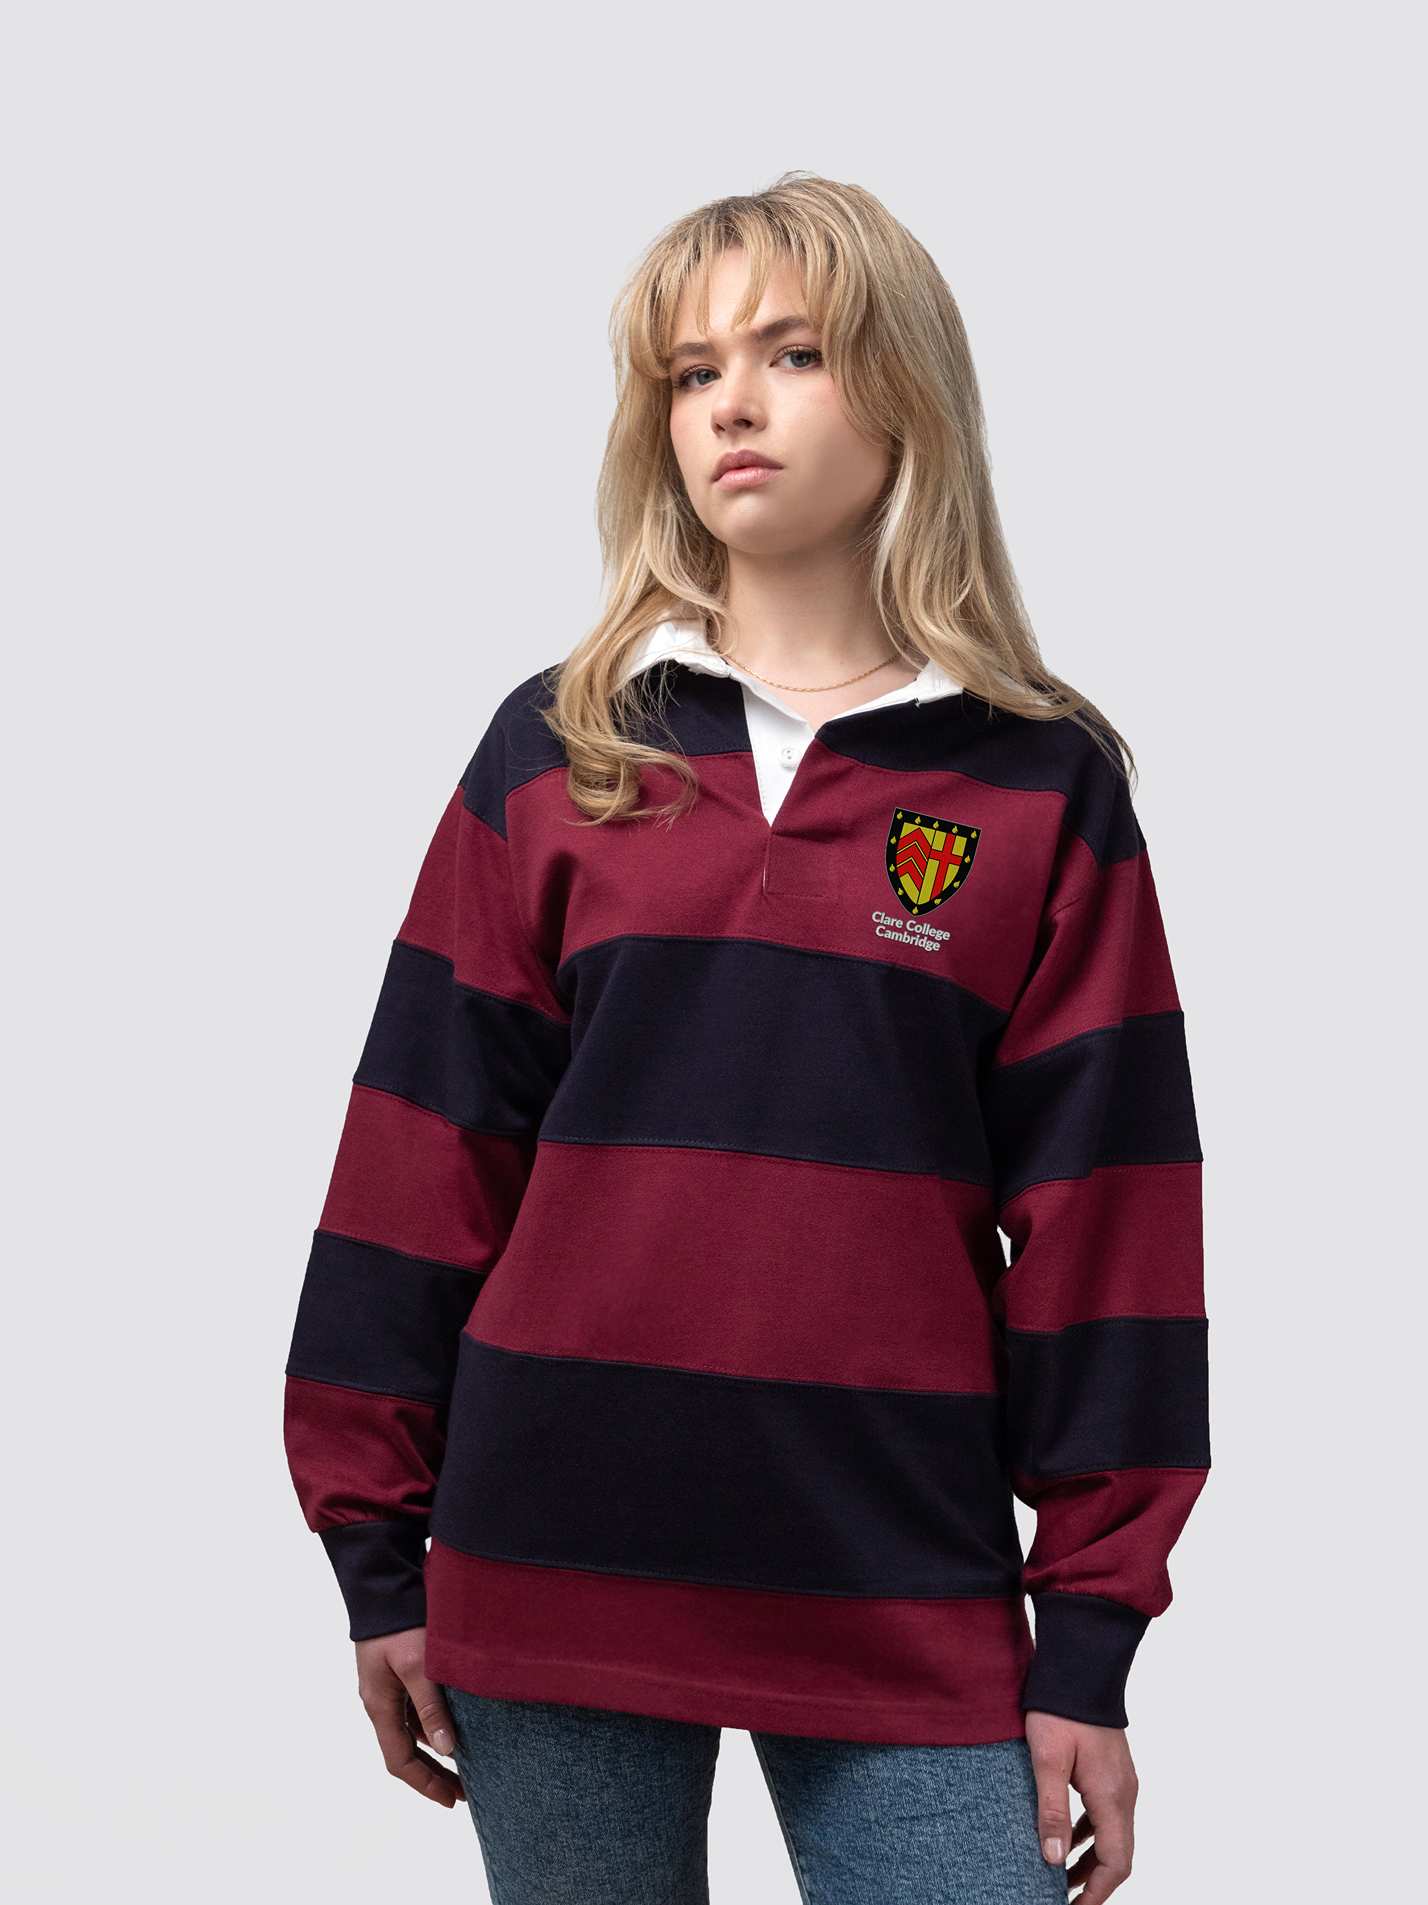 Clare College rugby shirt, with burgundy and navy stripes